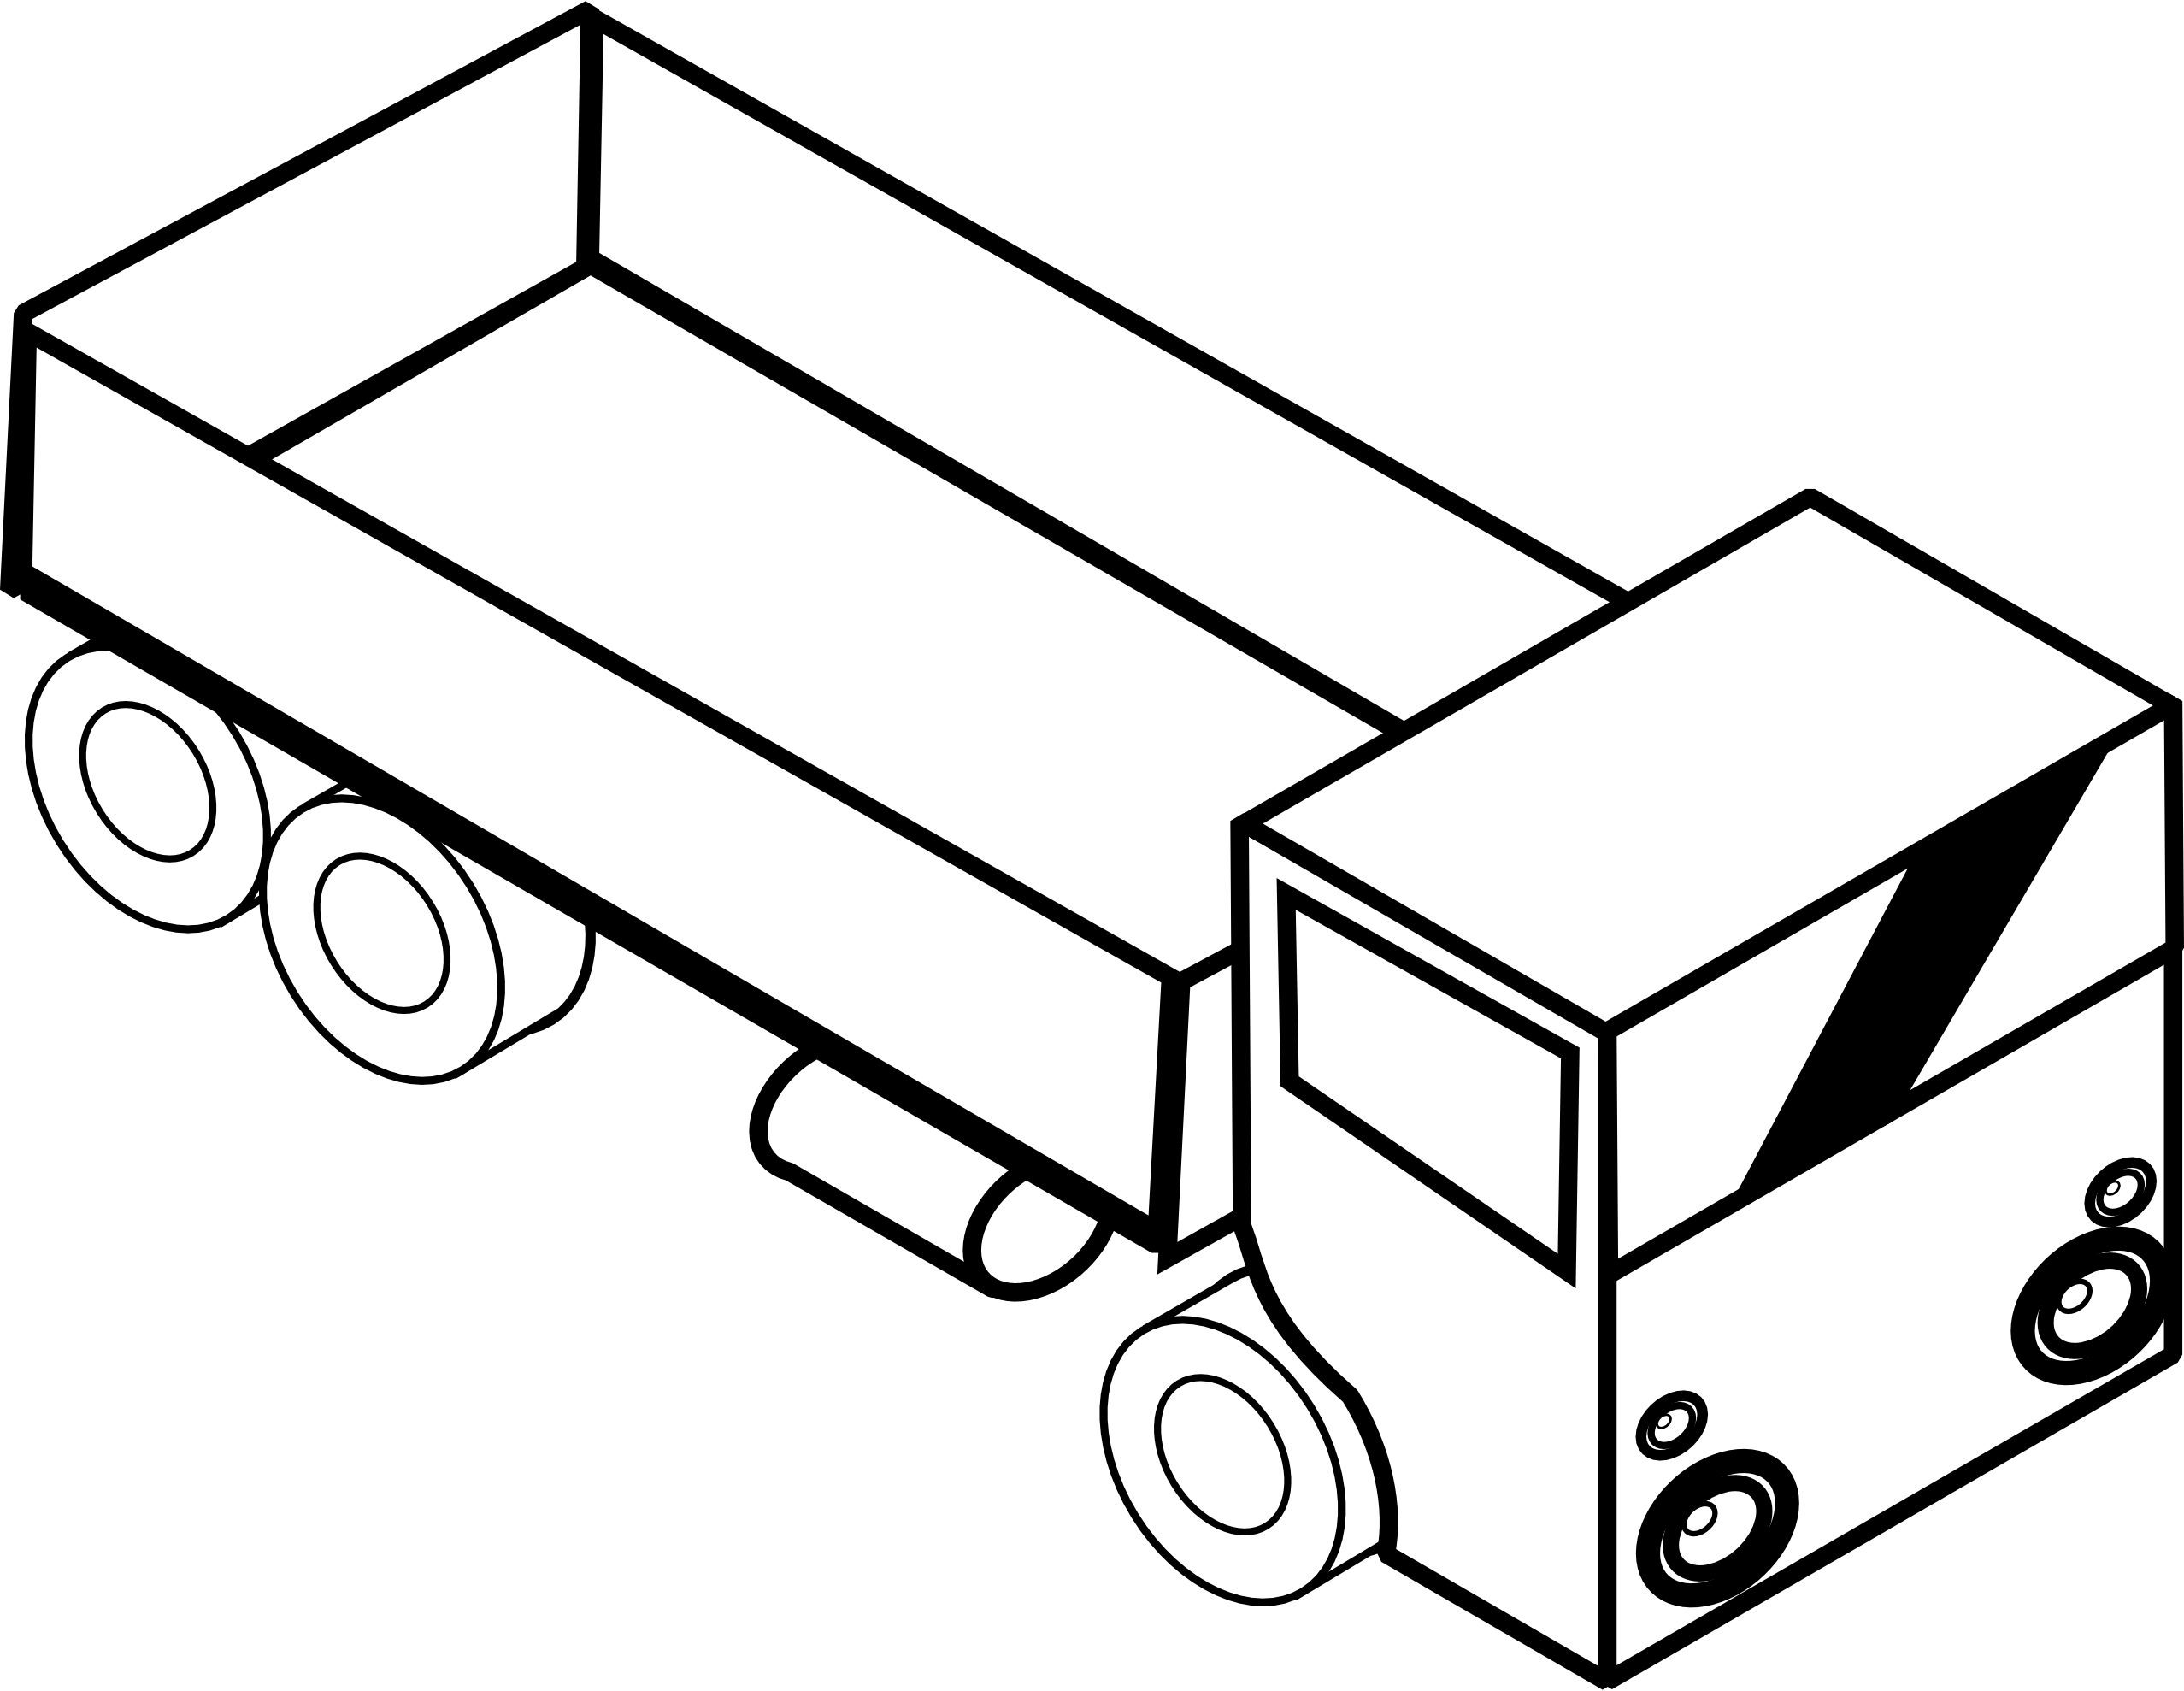 Truck panda free images. Firetruck clipart black and white